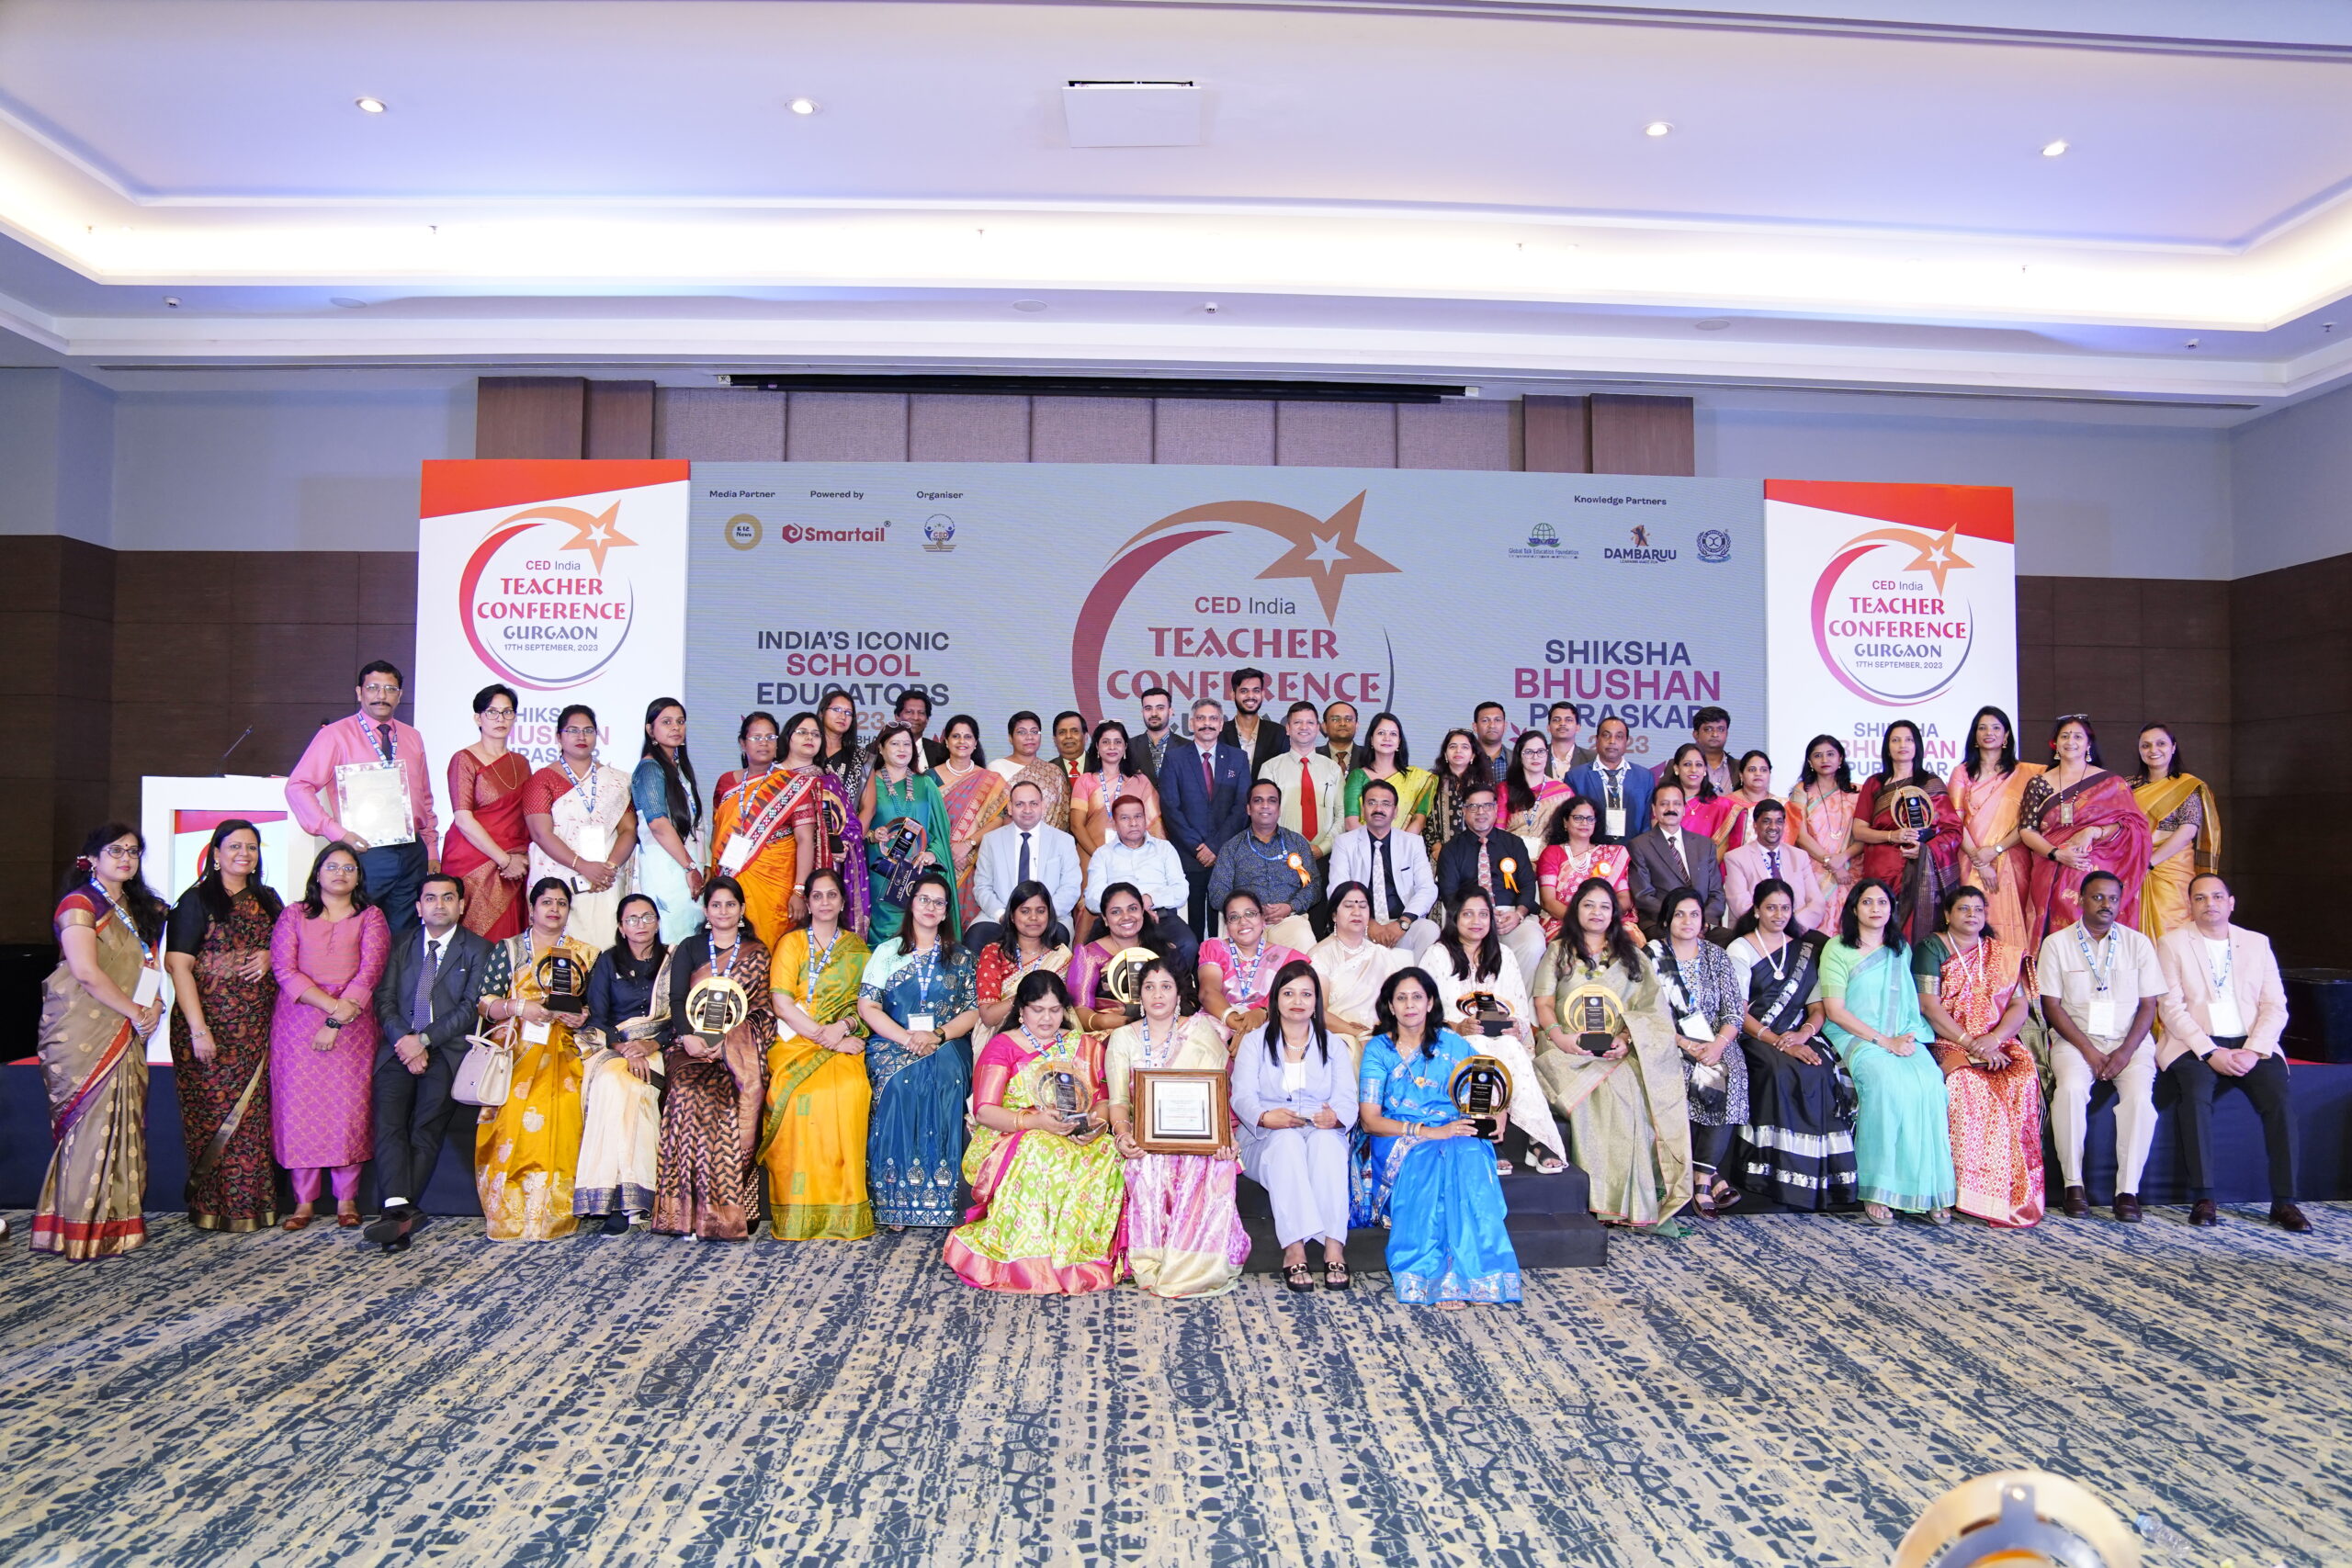 “CED INDIA Foundation Commended for Hosting a Successful Teacher Conference and Shiksha Bhushan Puraskar 2023.”